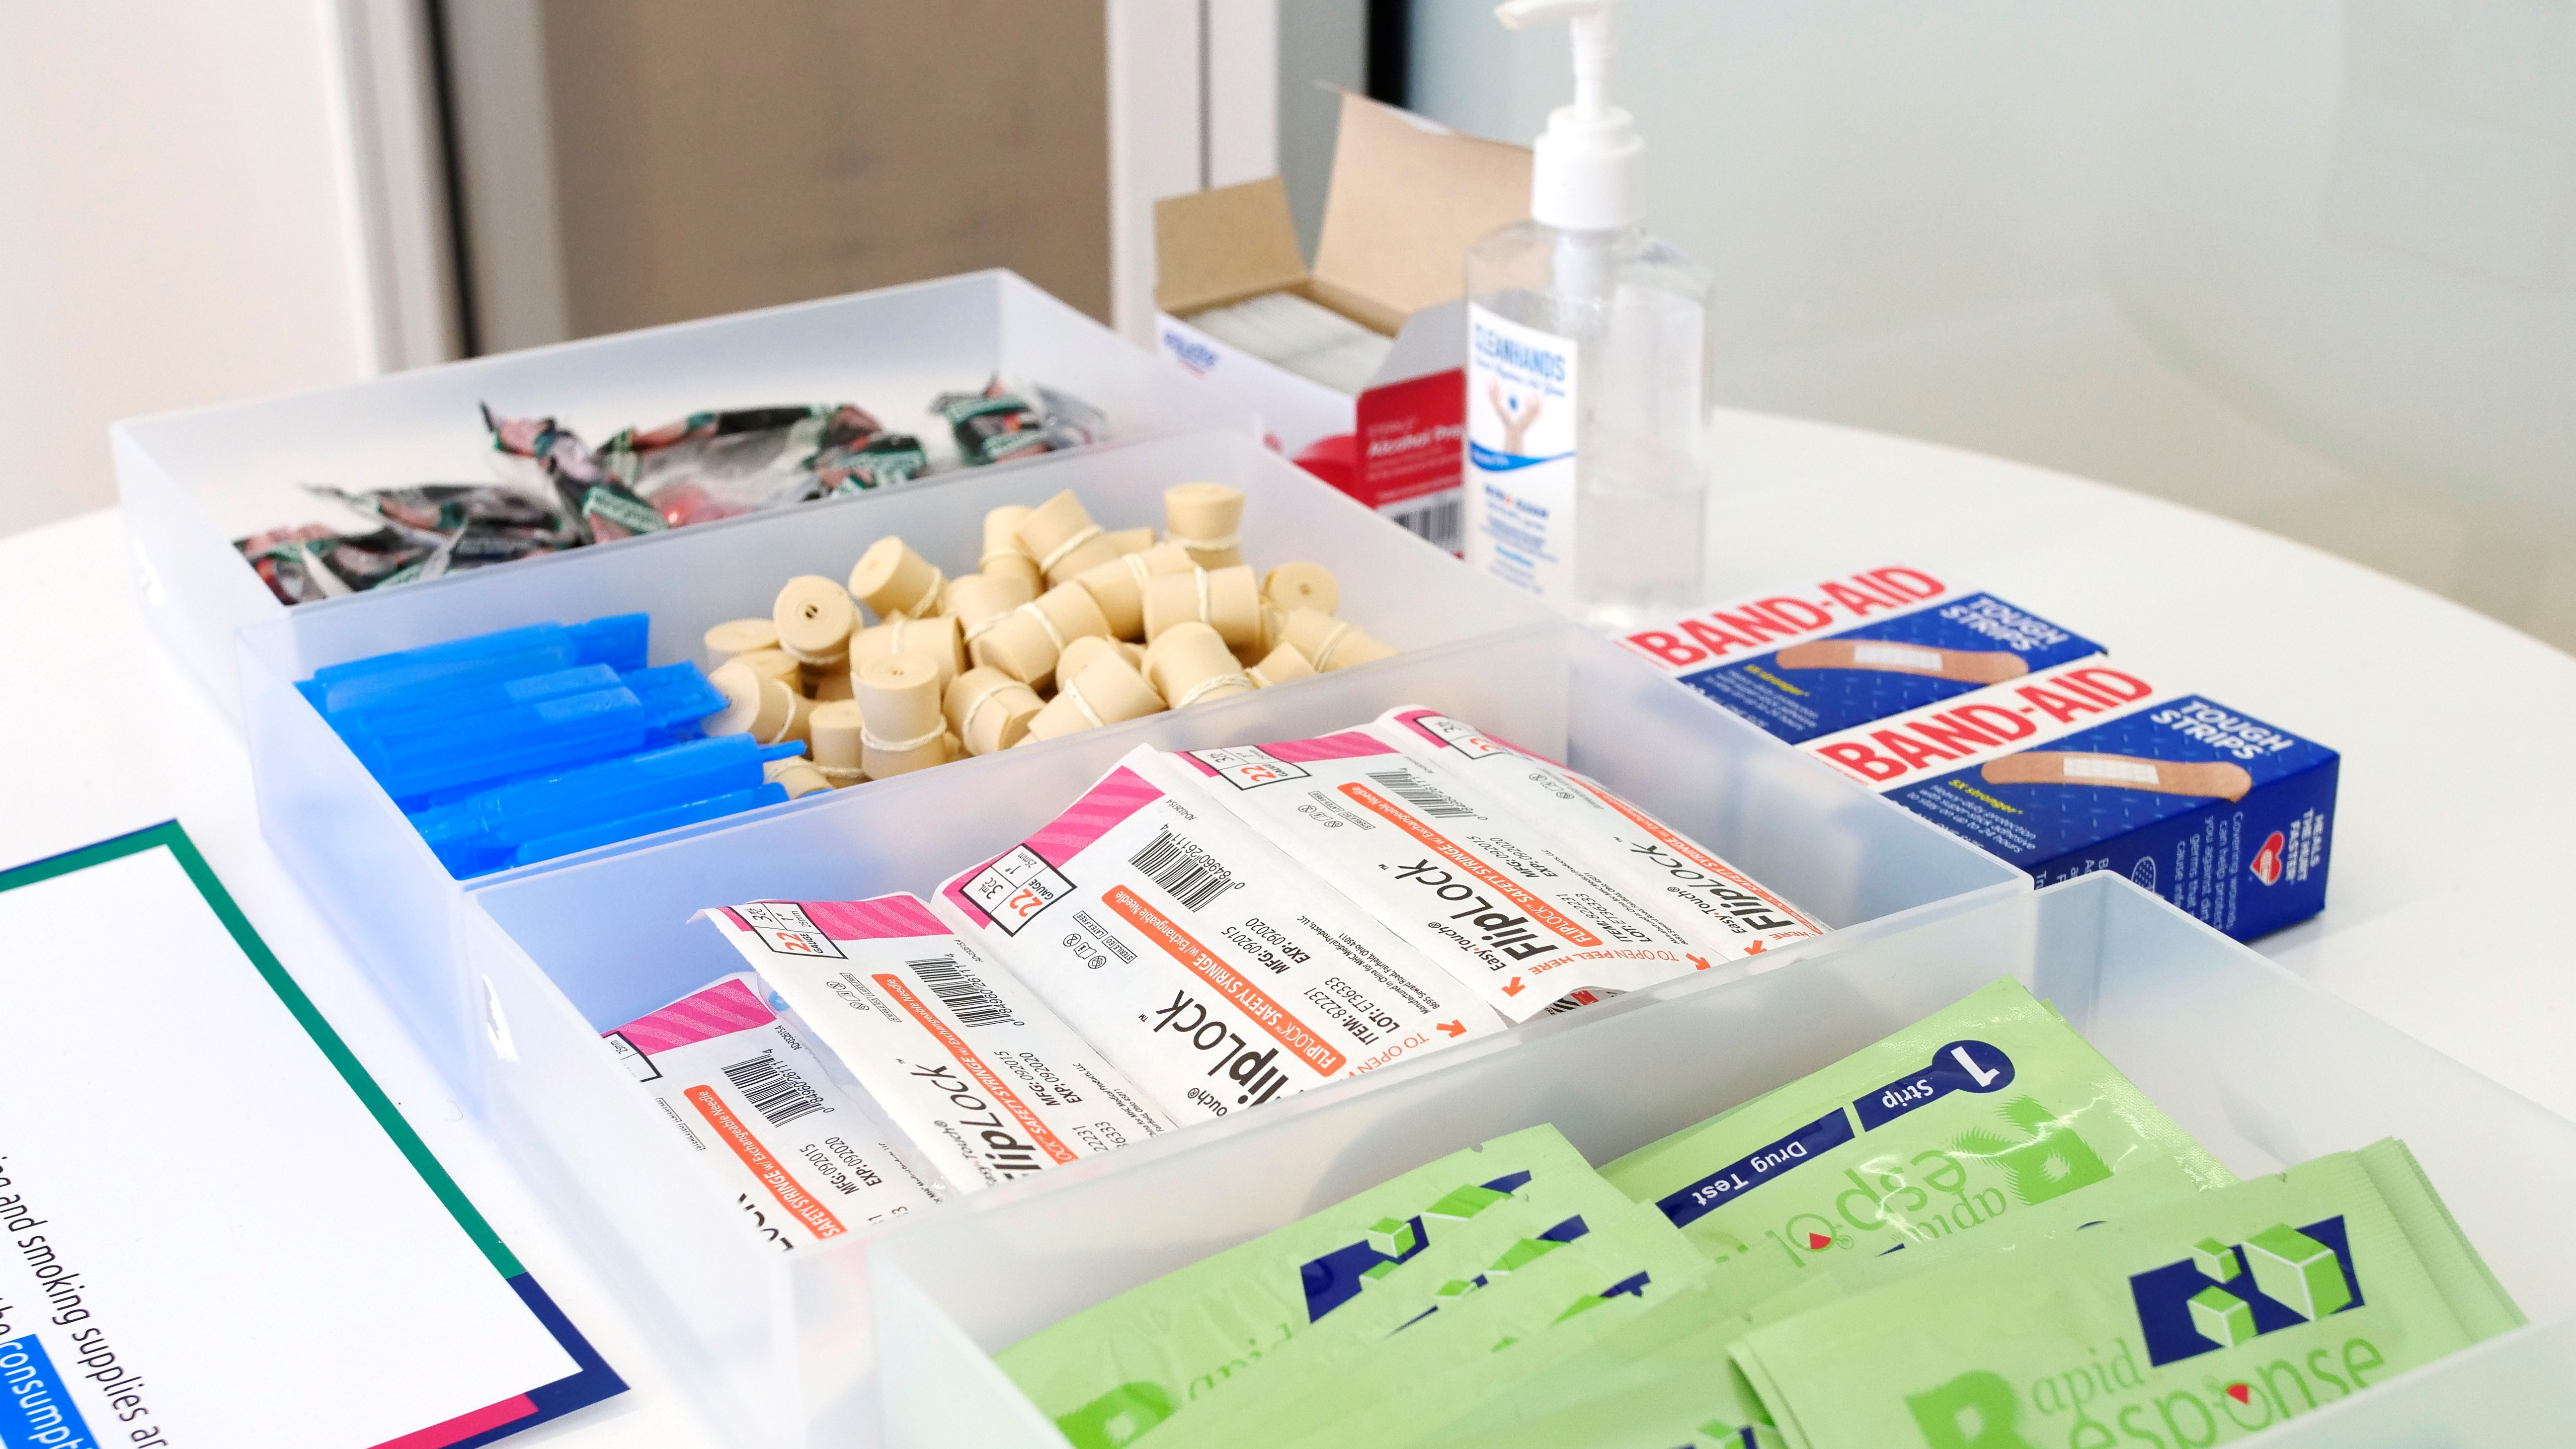 A display showing the sterile injecting and smoking supplies, including alcohol swabs and tourniquets, that will be available at the new harm reduction centers.